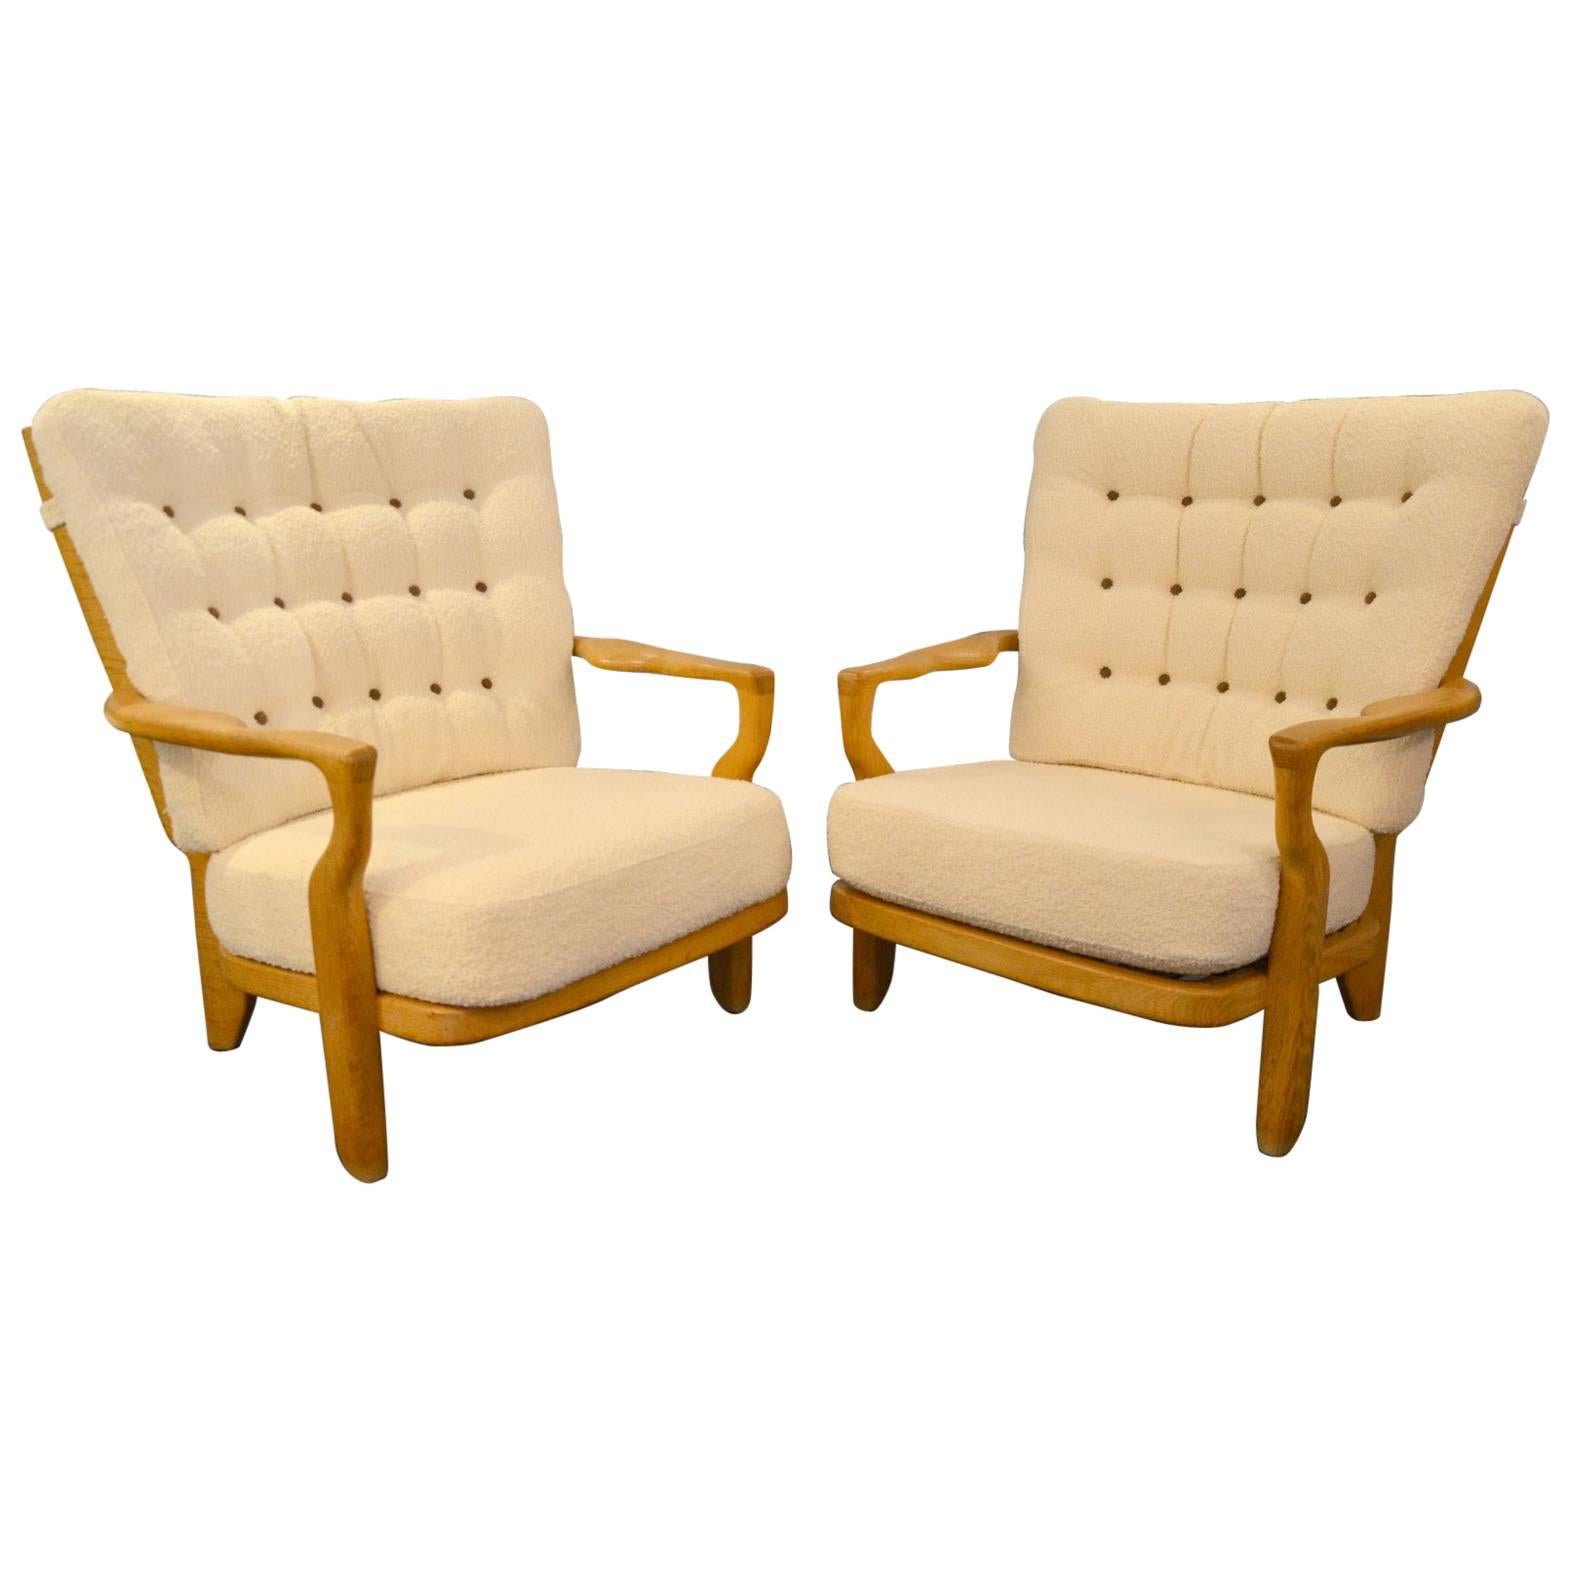 Huge "Grand repos" Guillerme et Chambron Pair of Armchairs, circa 1960 For Sale